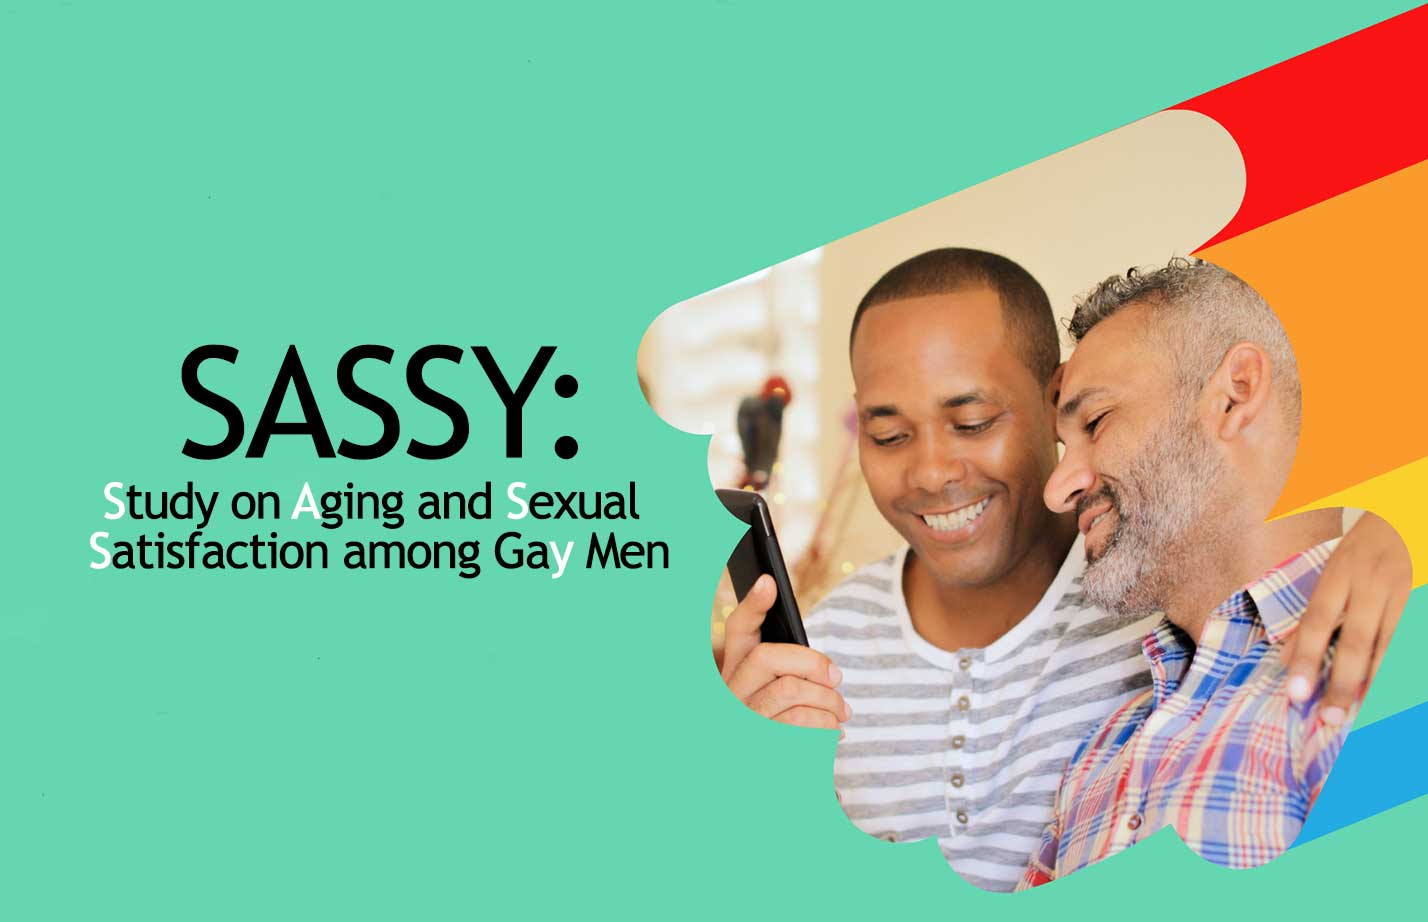 Study on Aging and Sexual Satisfaction Among Gay Men